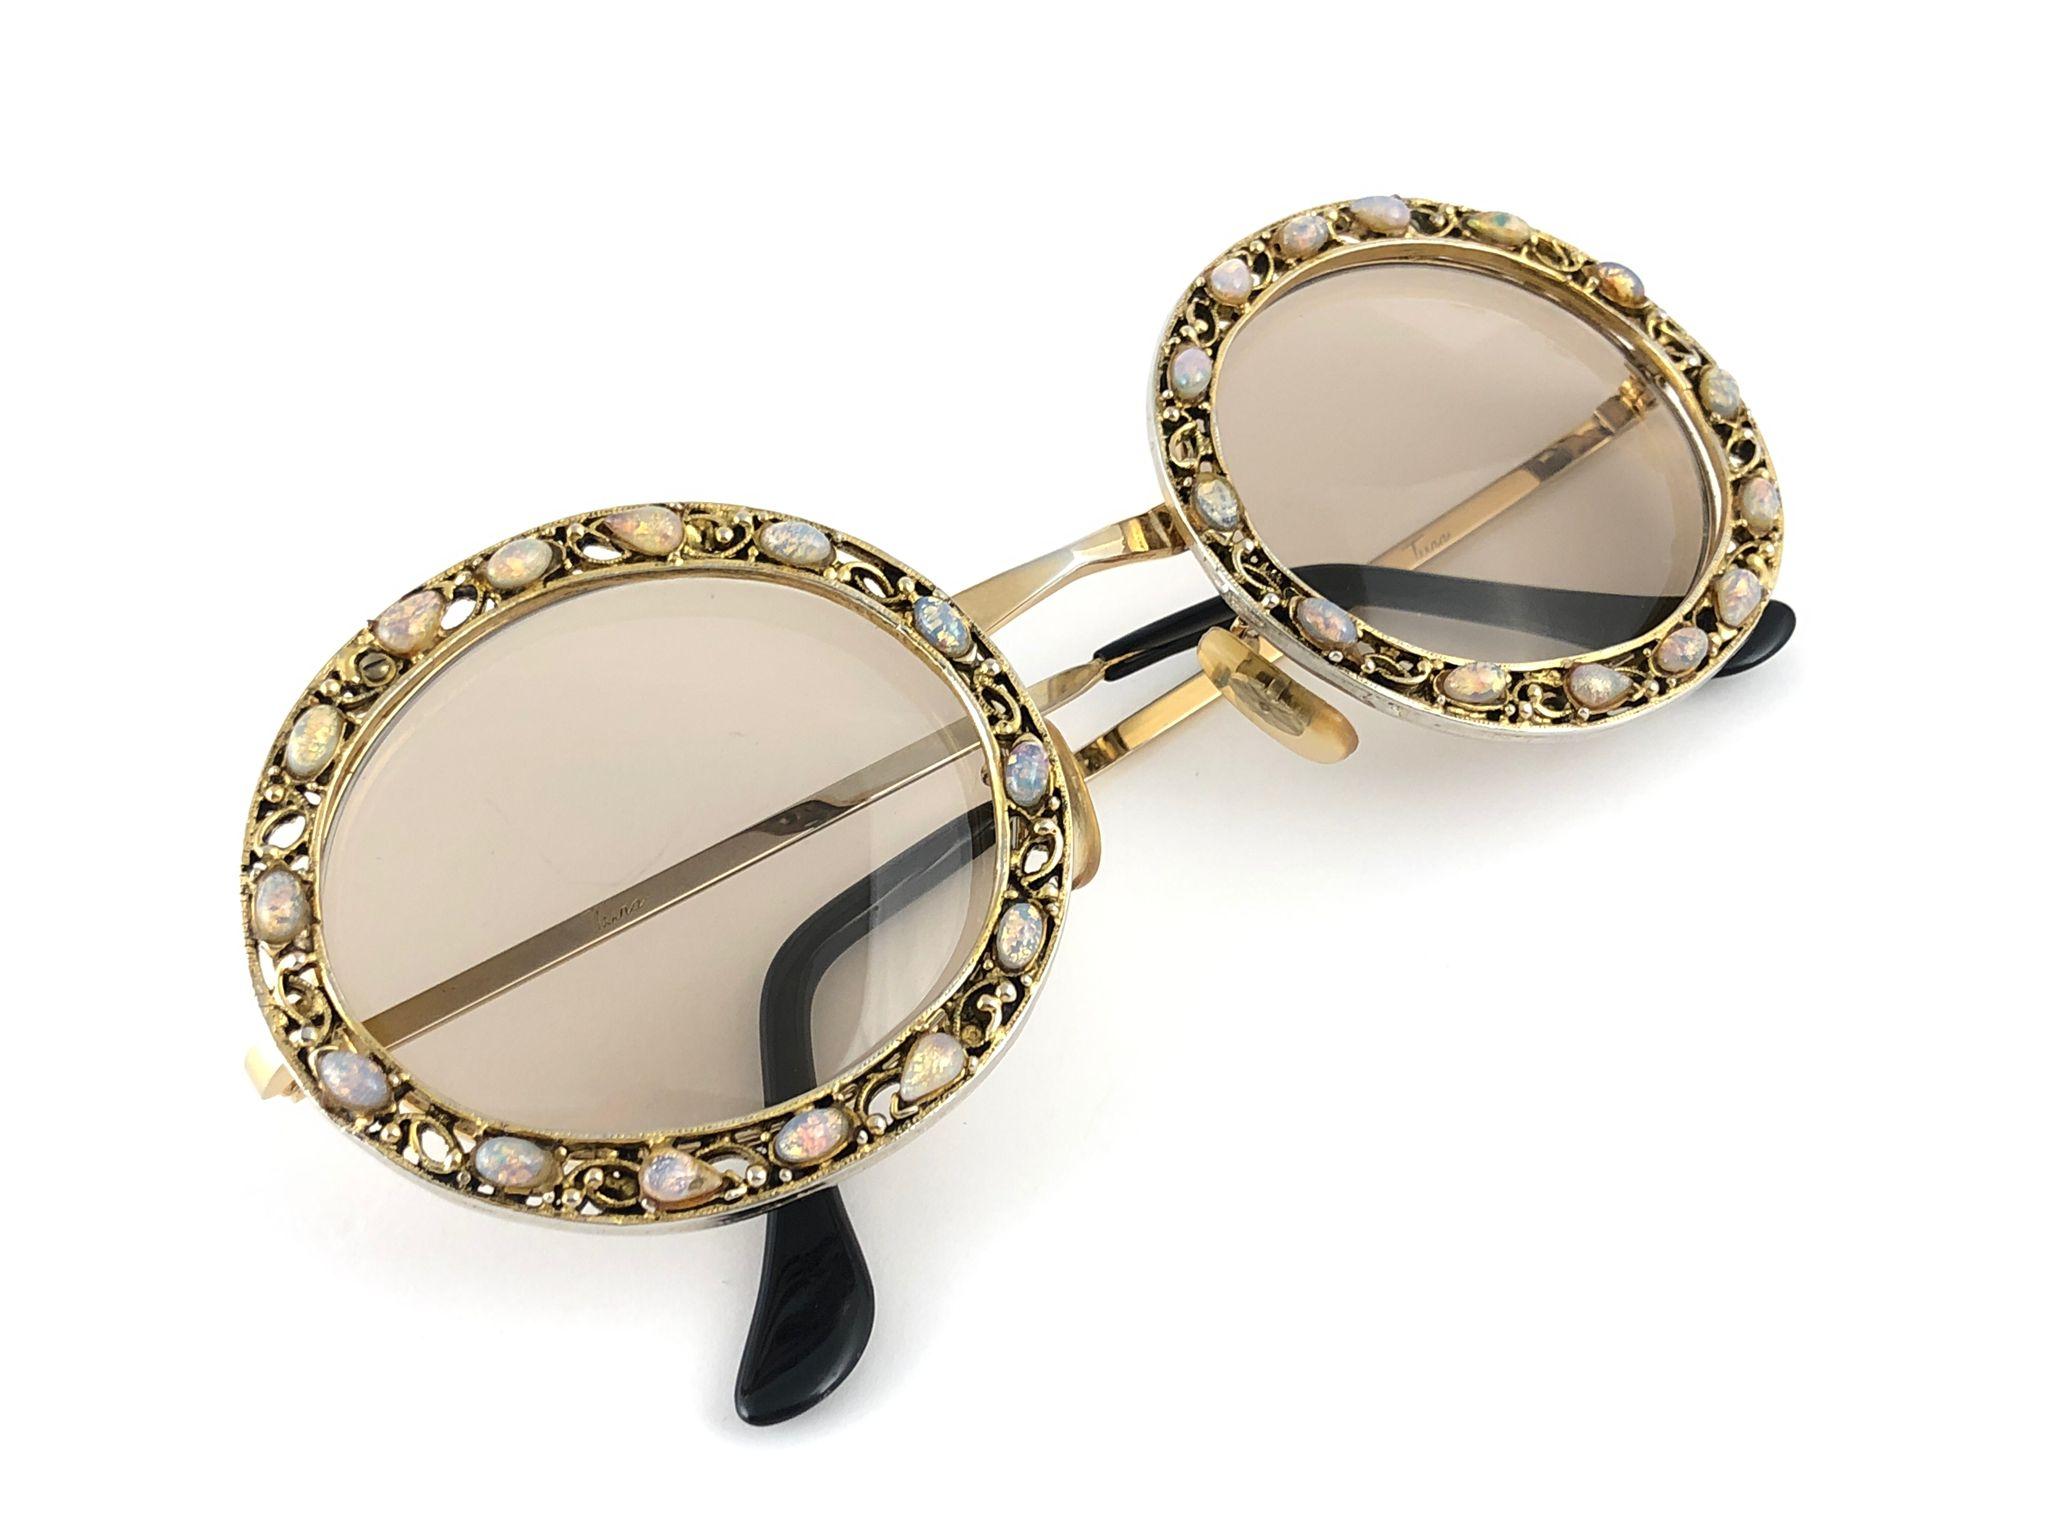 Ultra Rare 1960 Tura Jewelled Opal Accented Frame Archive Dior Sunglasses For Sale 7